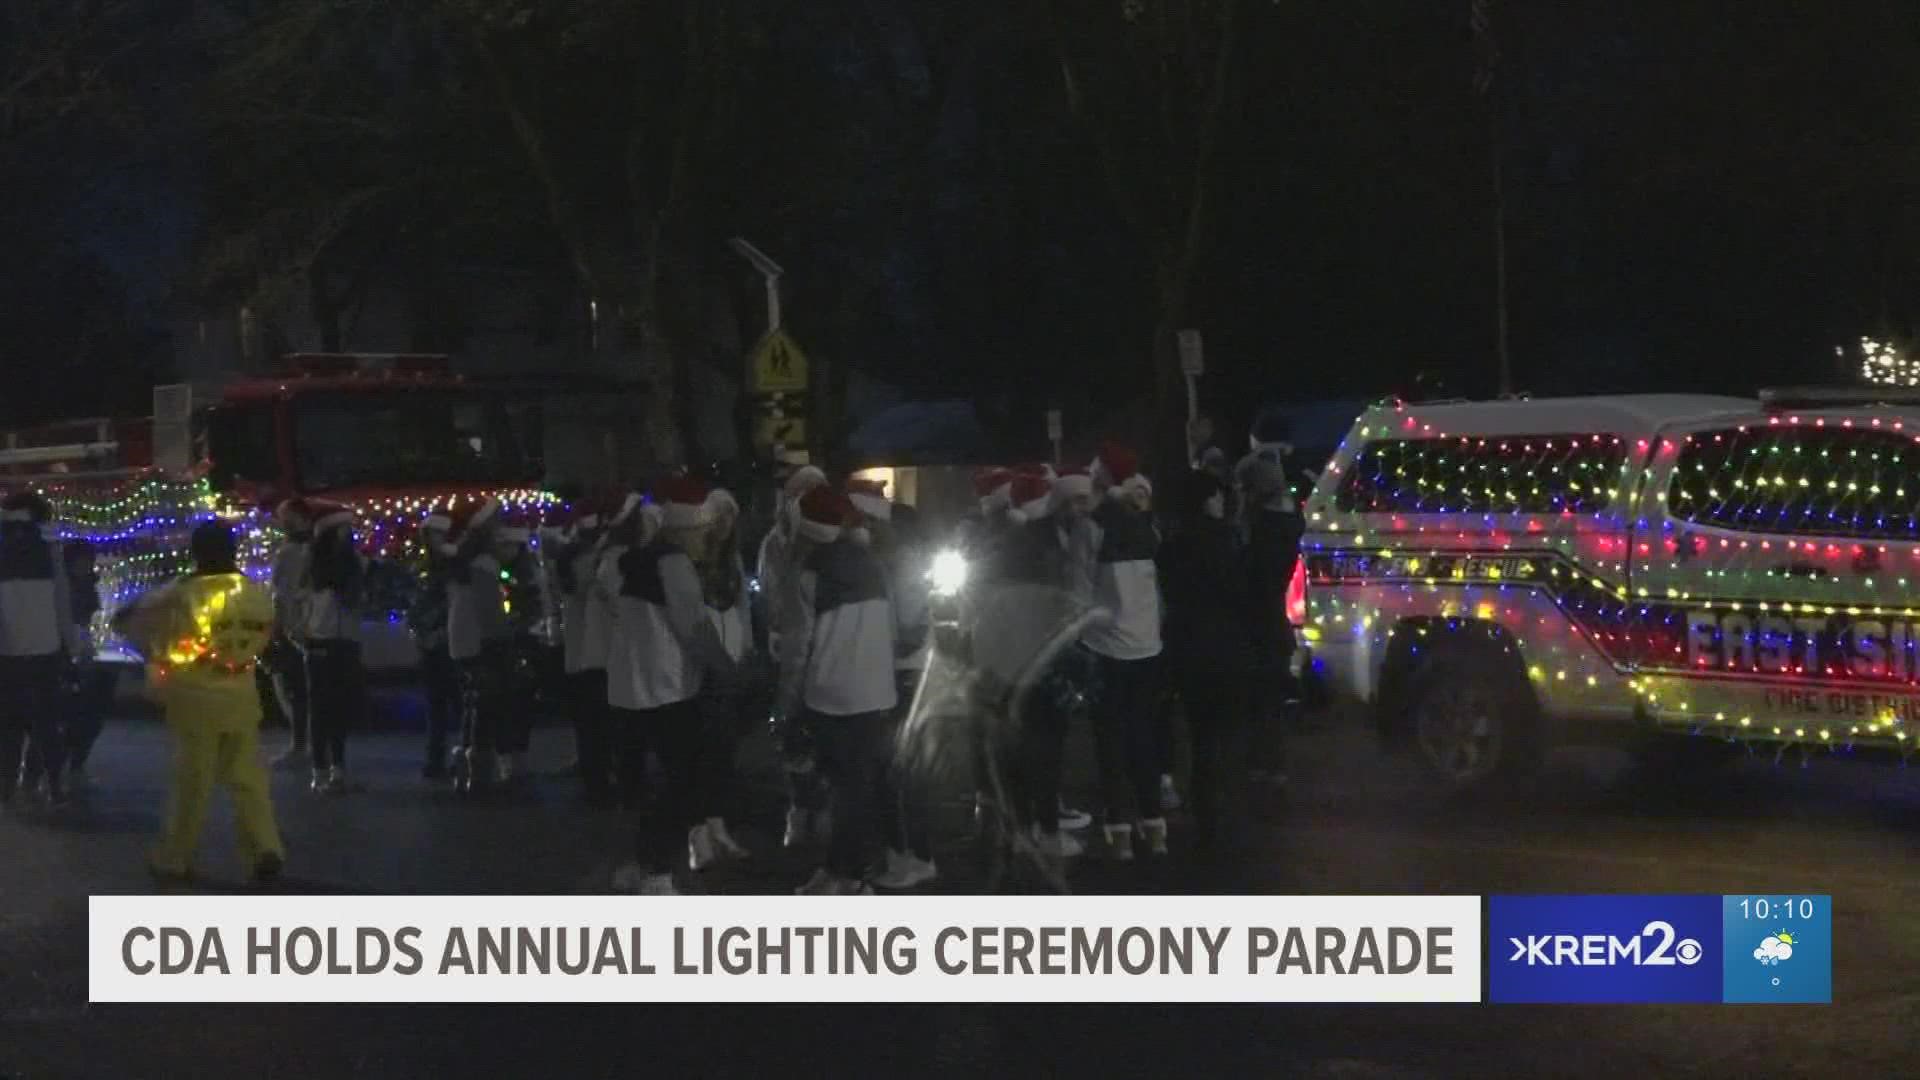 Hundreds of people flooded the streets of downtown Coeur d'Alene to watch the holiday lighting parade. The parade featured 40 different floats and marches.